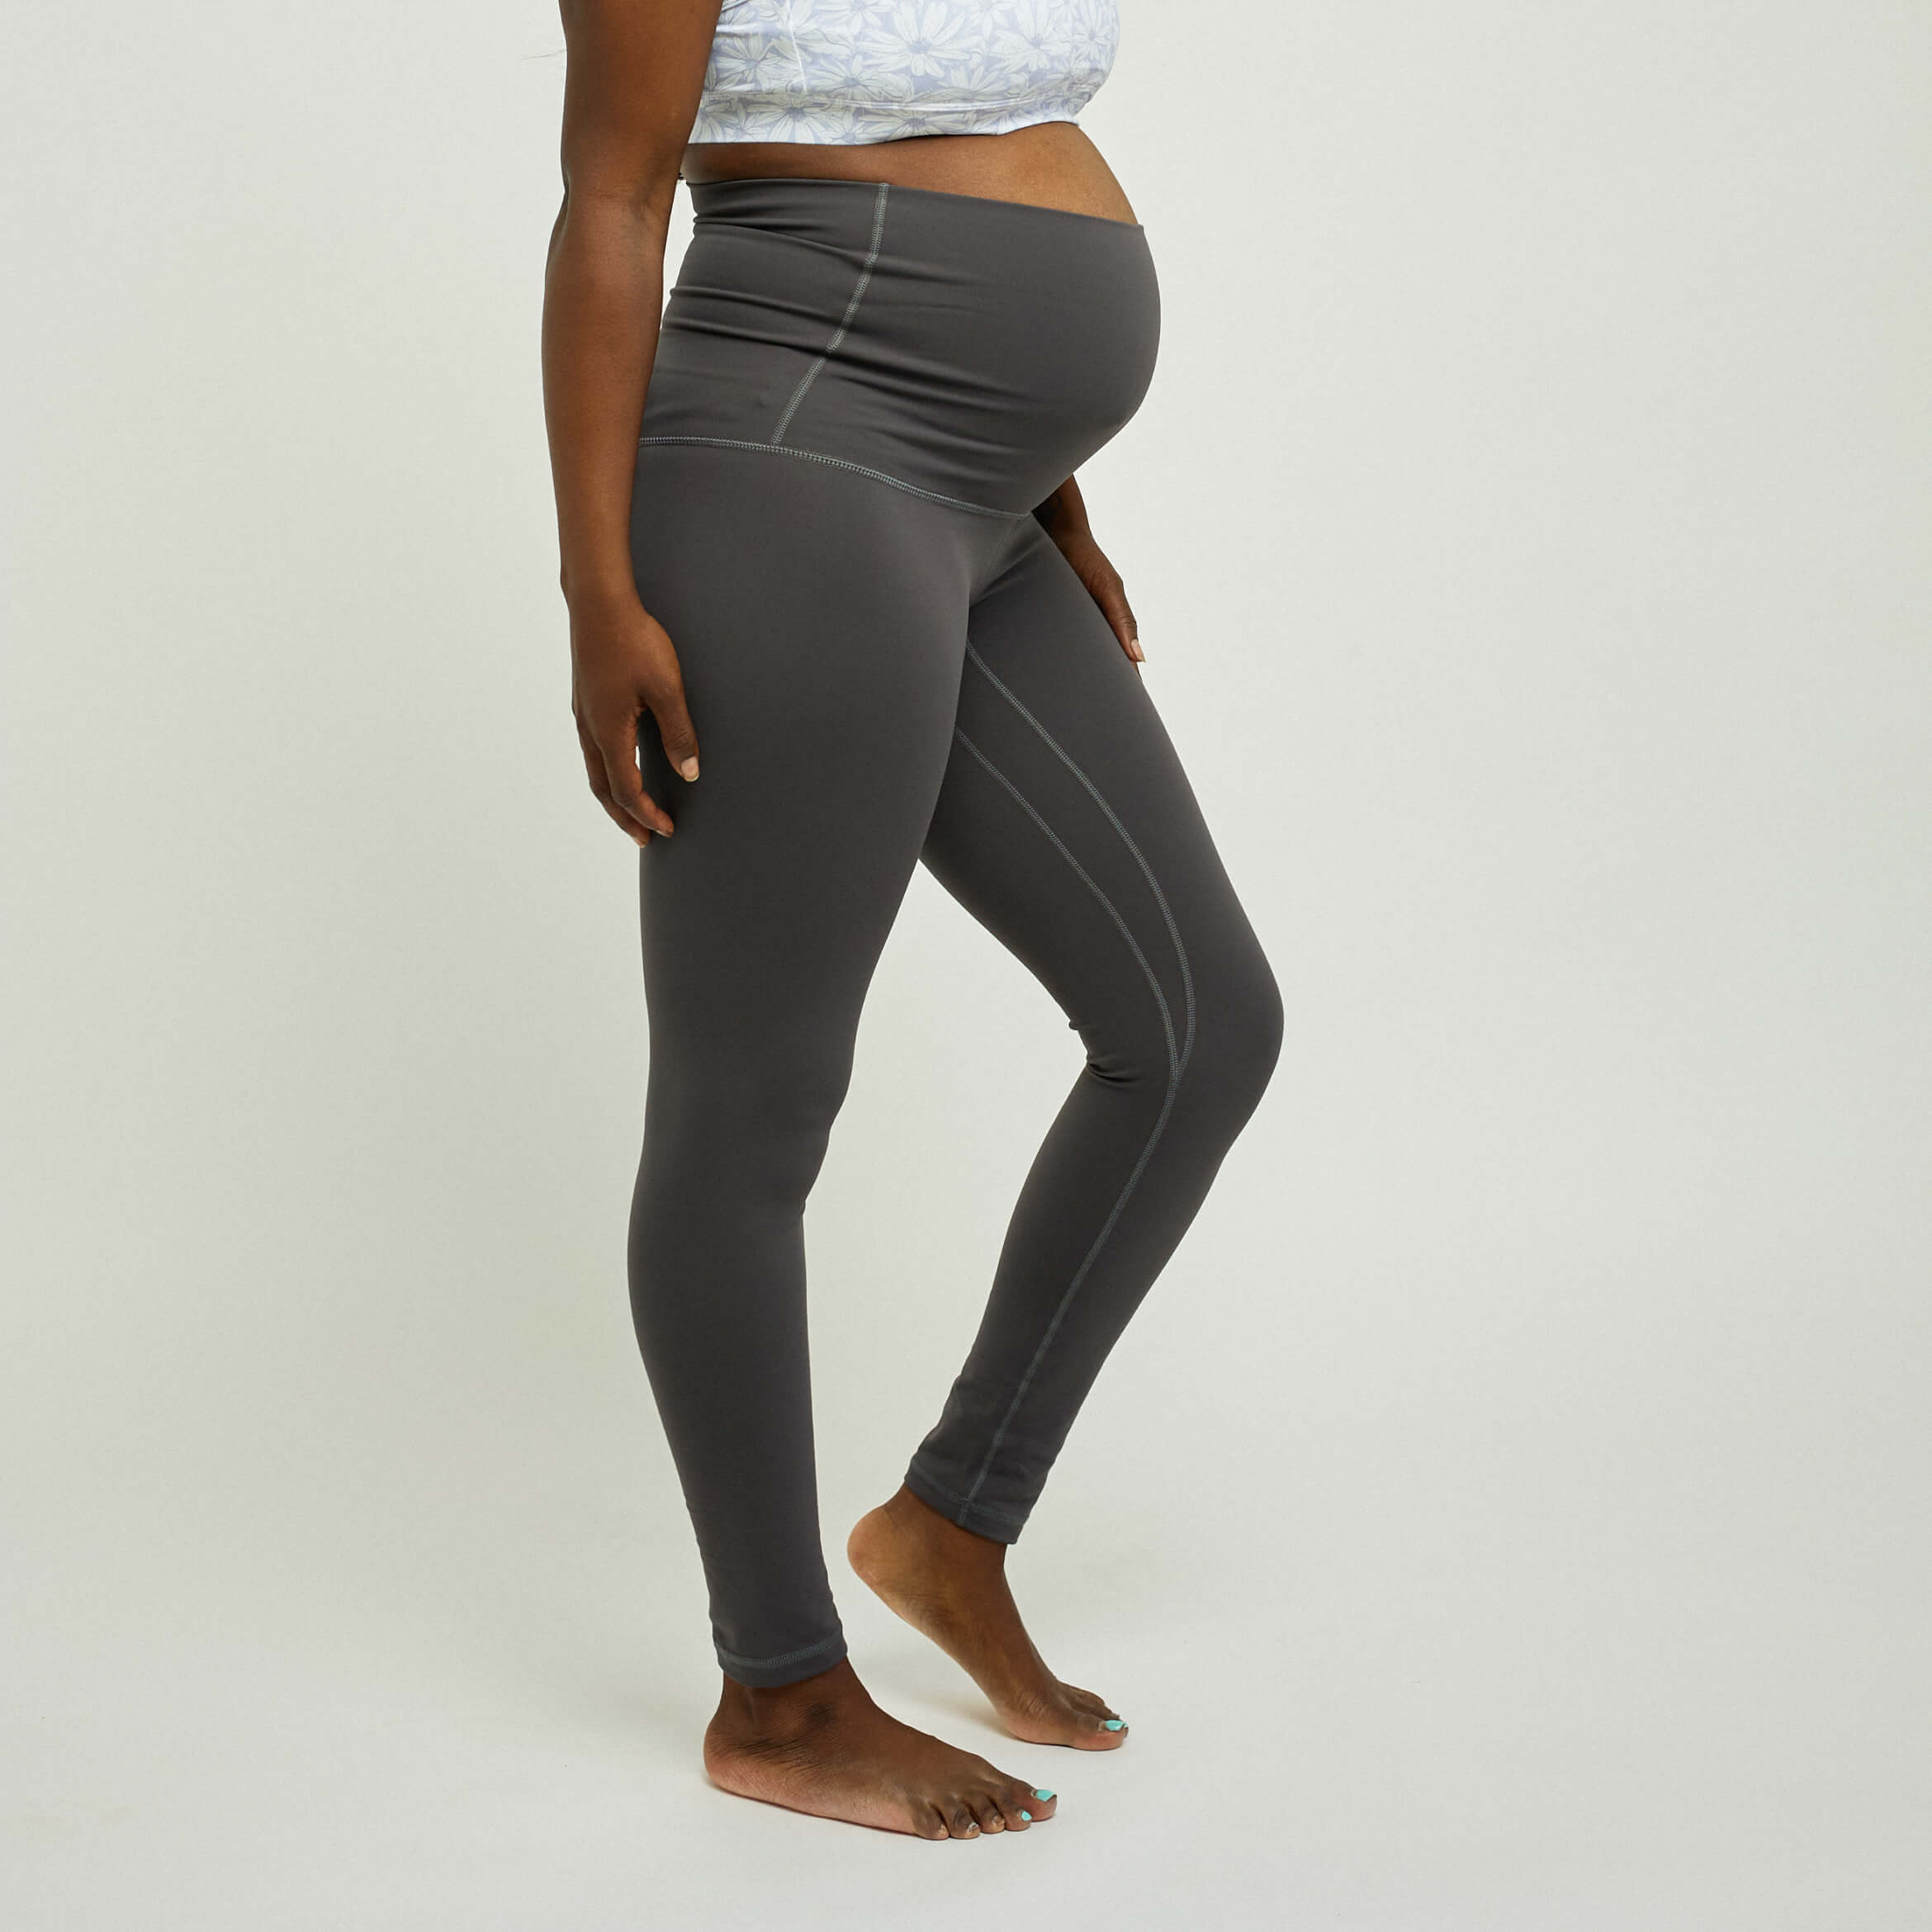 Generic Maternity Leggings with Anatomical Pregnancy Insert Grows